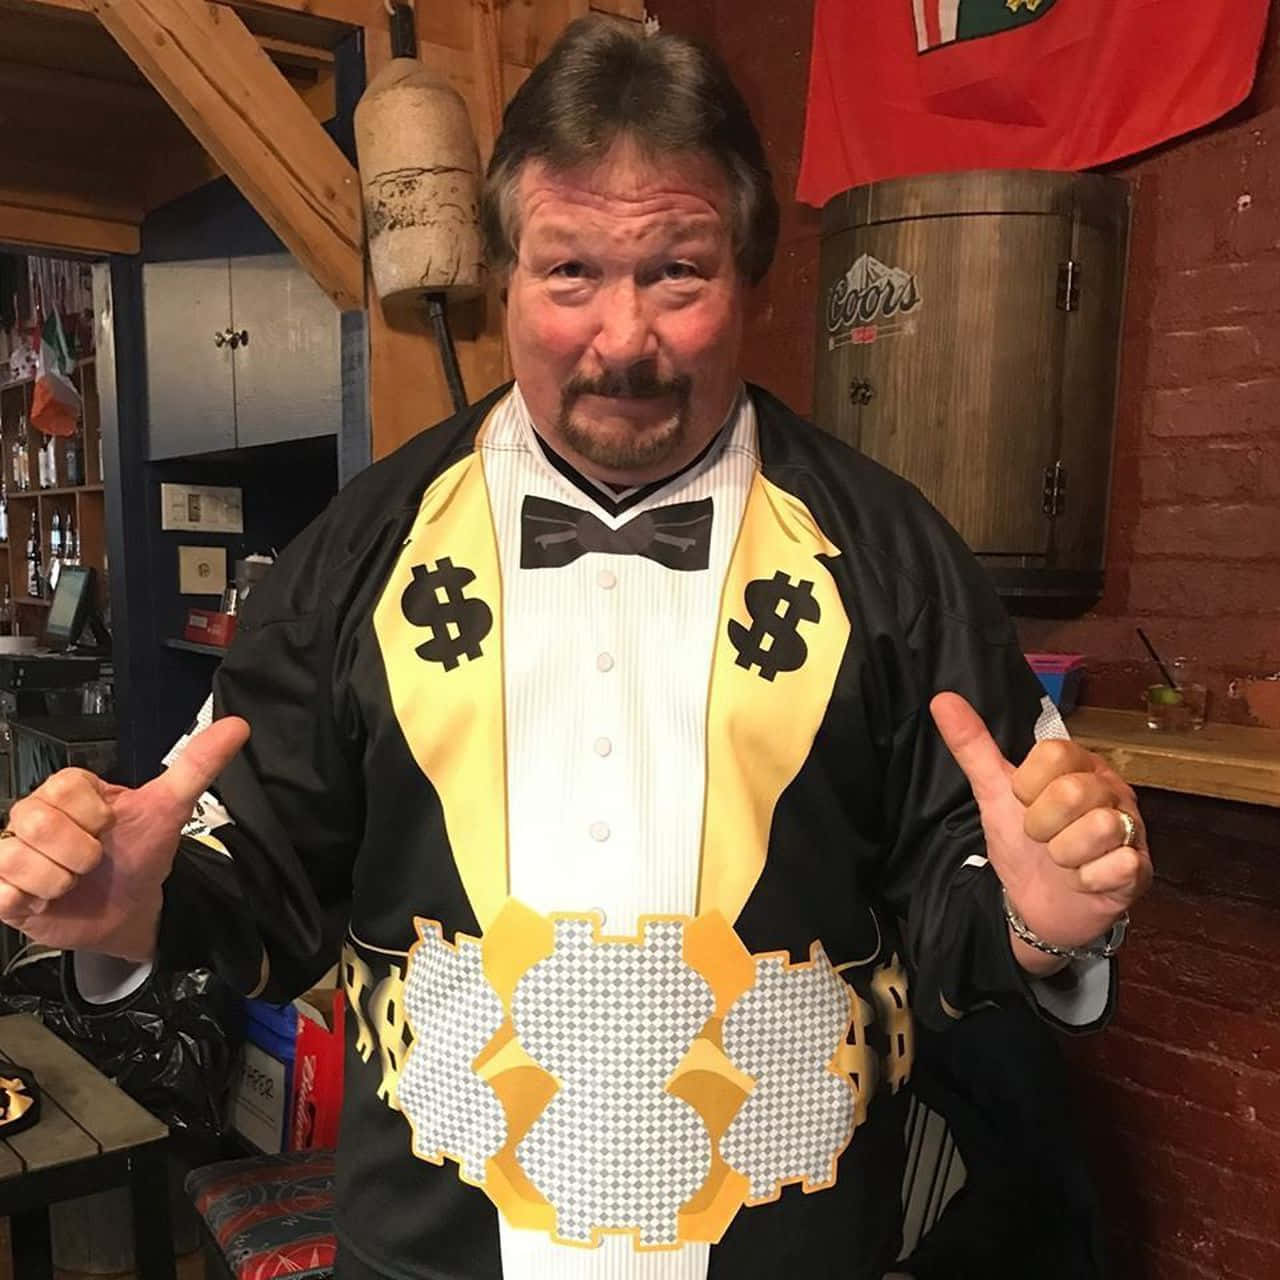 Teddibiase Million Dollar Man Is Not A Complete Sentence And Cannot Be Translated As Is. However, If You Would Like A Translation Of The Phrase 